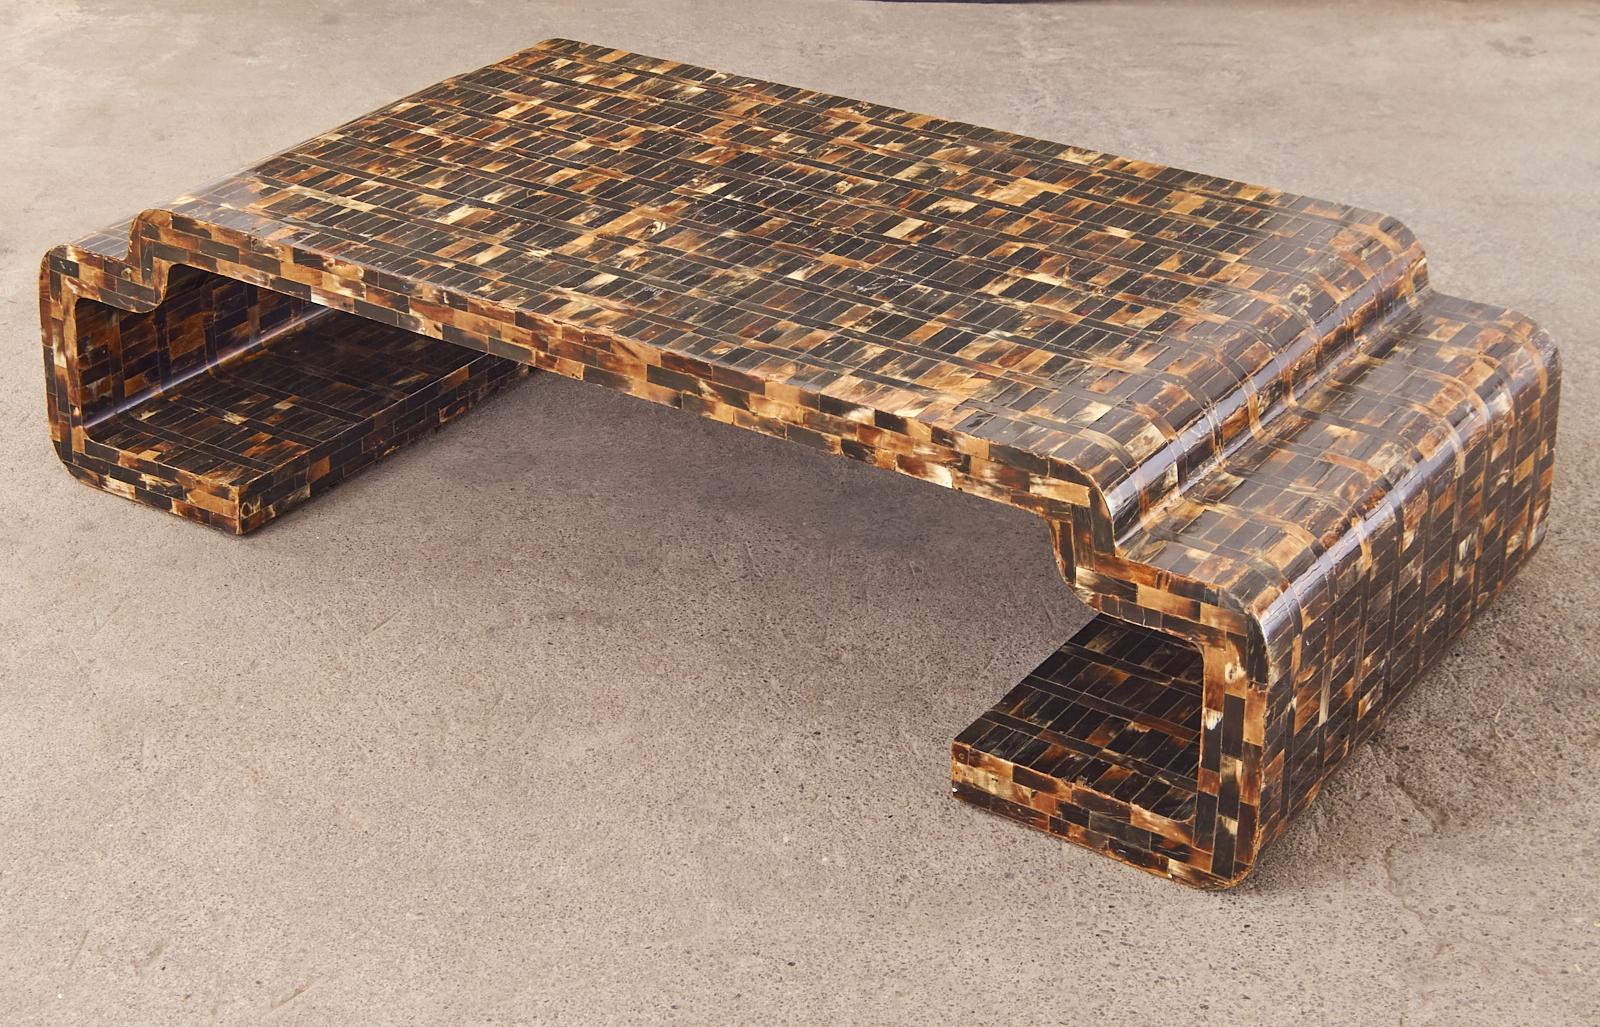 Extraordinary faux-tortoise shell tessellated horn veneer coffee or cocktail table attributed to Enrique Garcel. Made in Colombia the table has a 2.5 inch thick wood frame with stepped ends in a greek key motif. The surfaces are veneered with horn